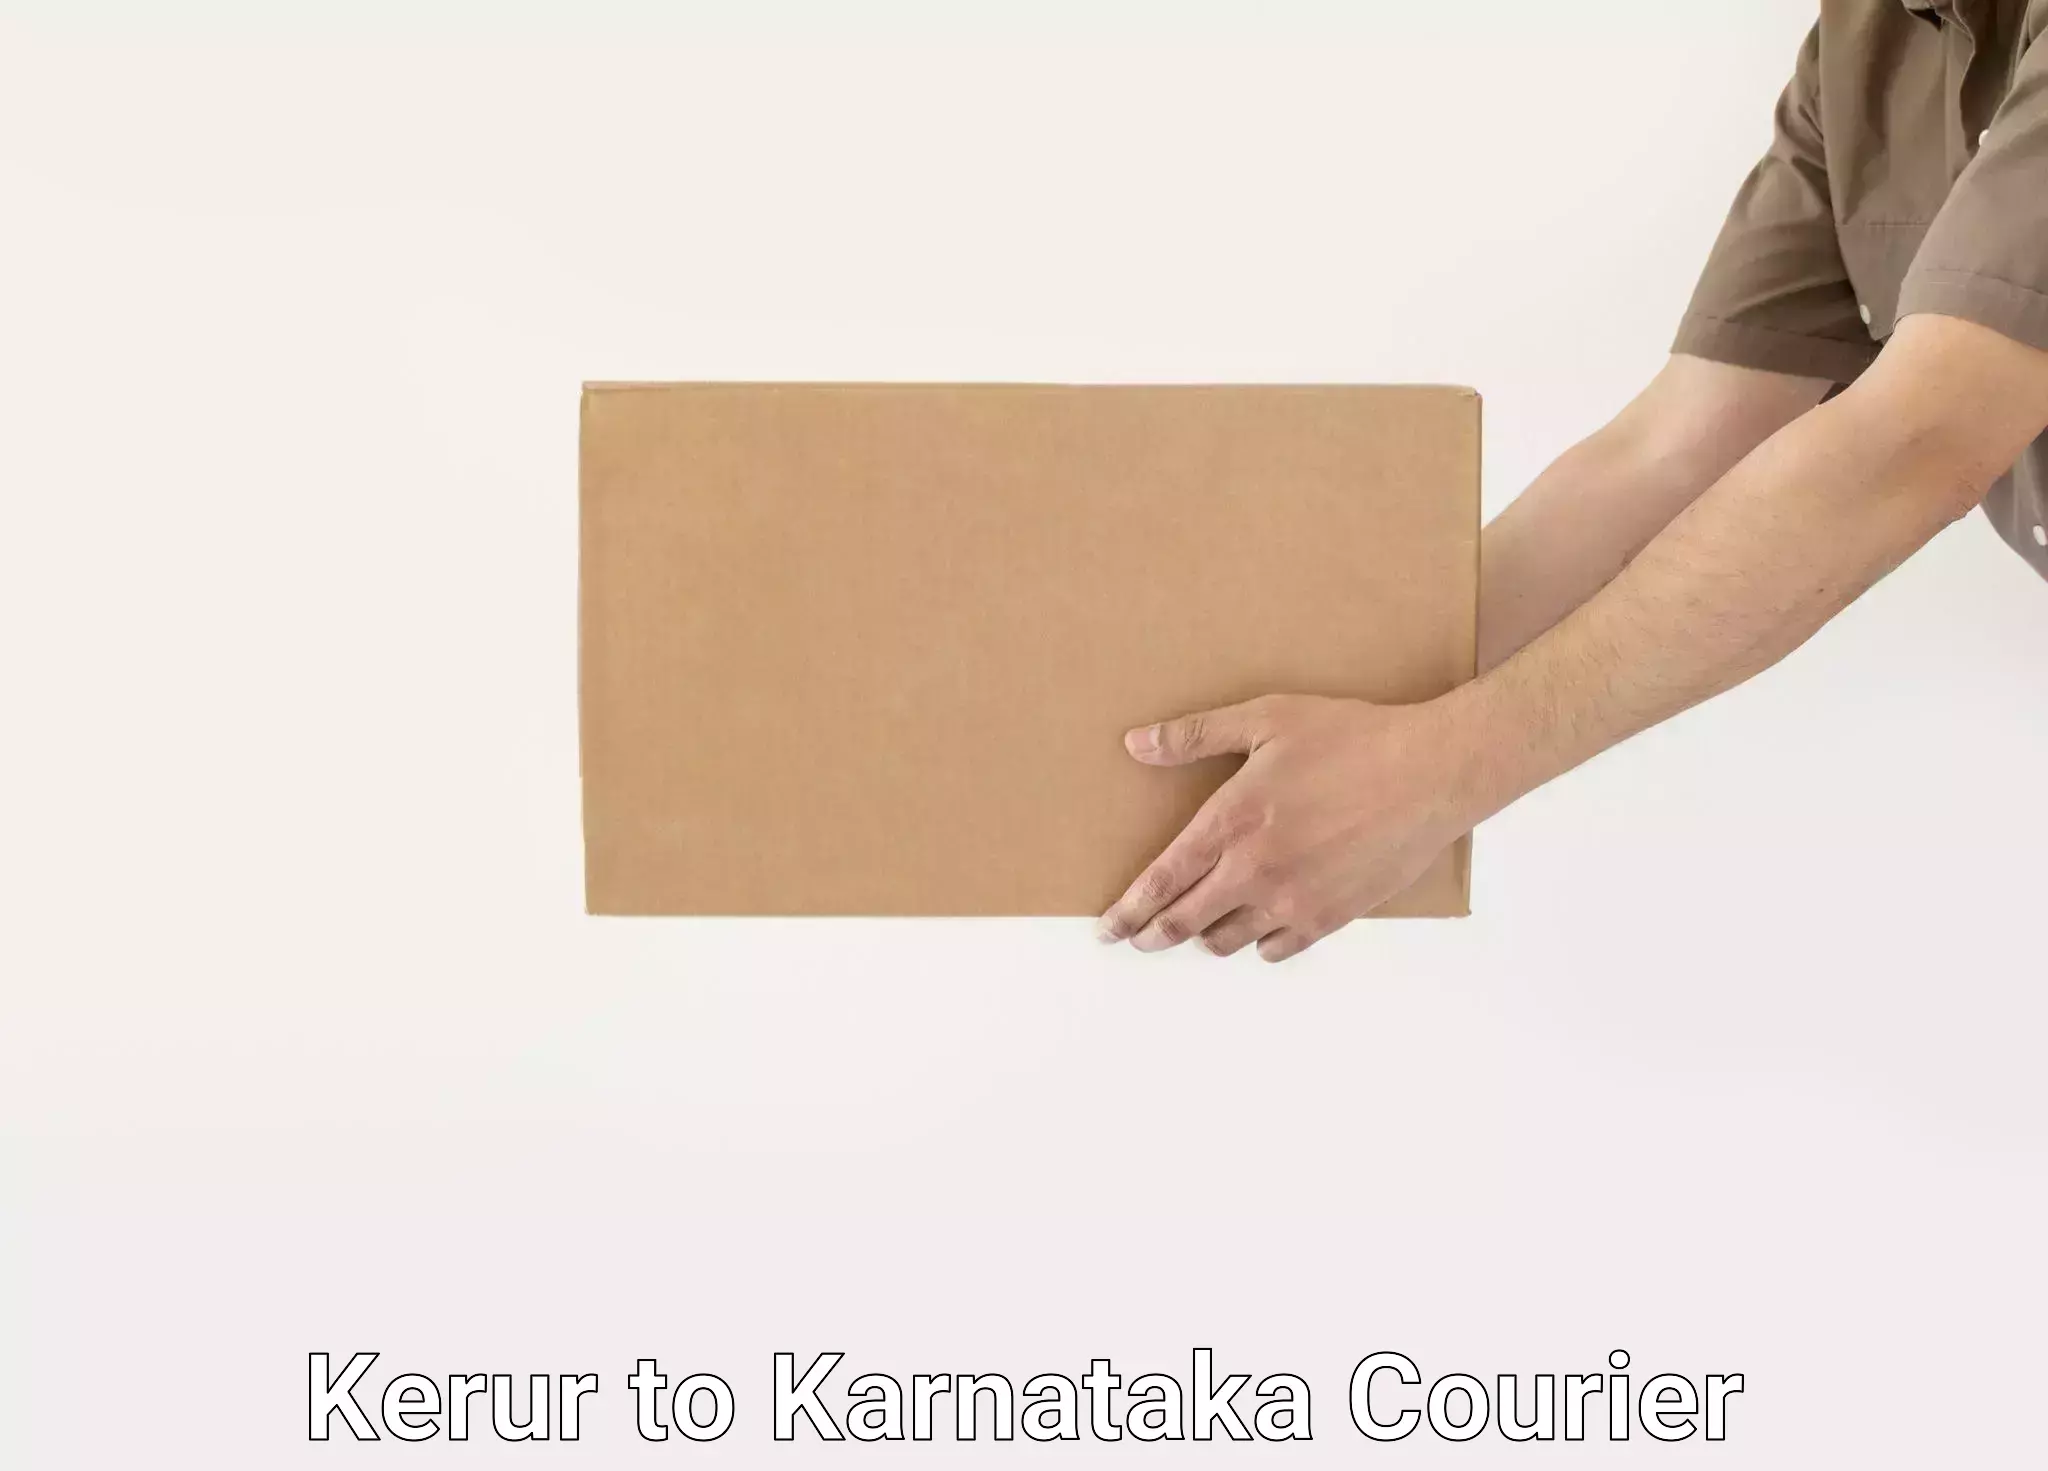 Home goods moving company Kerur to Manipal Academy of Higher Education